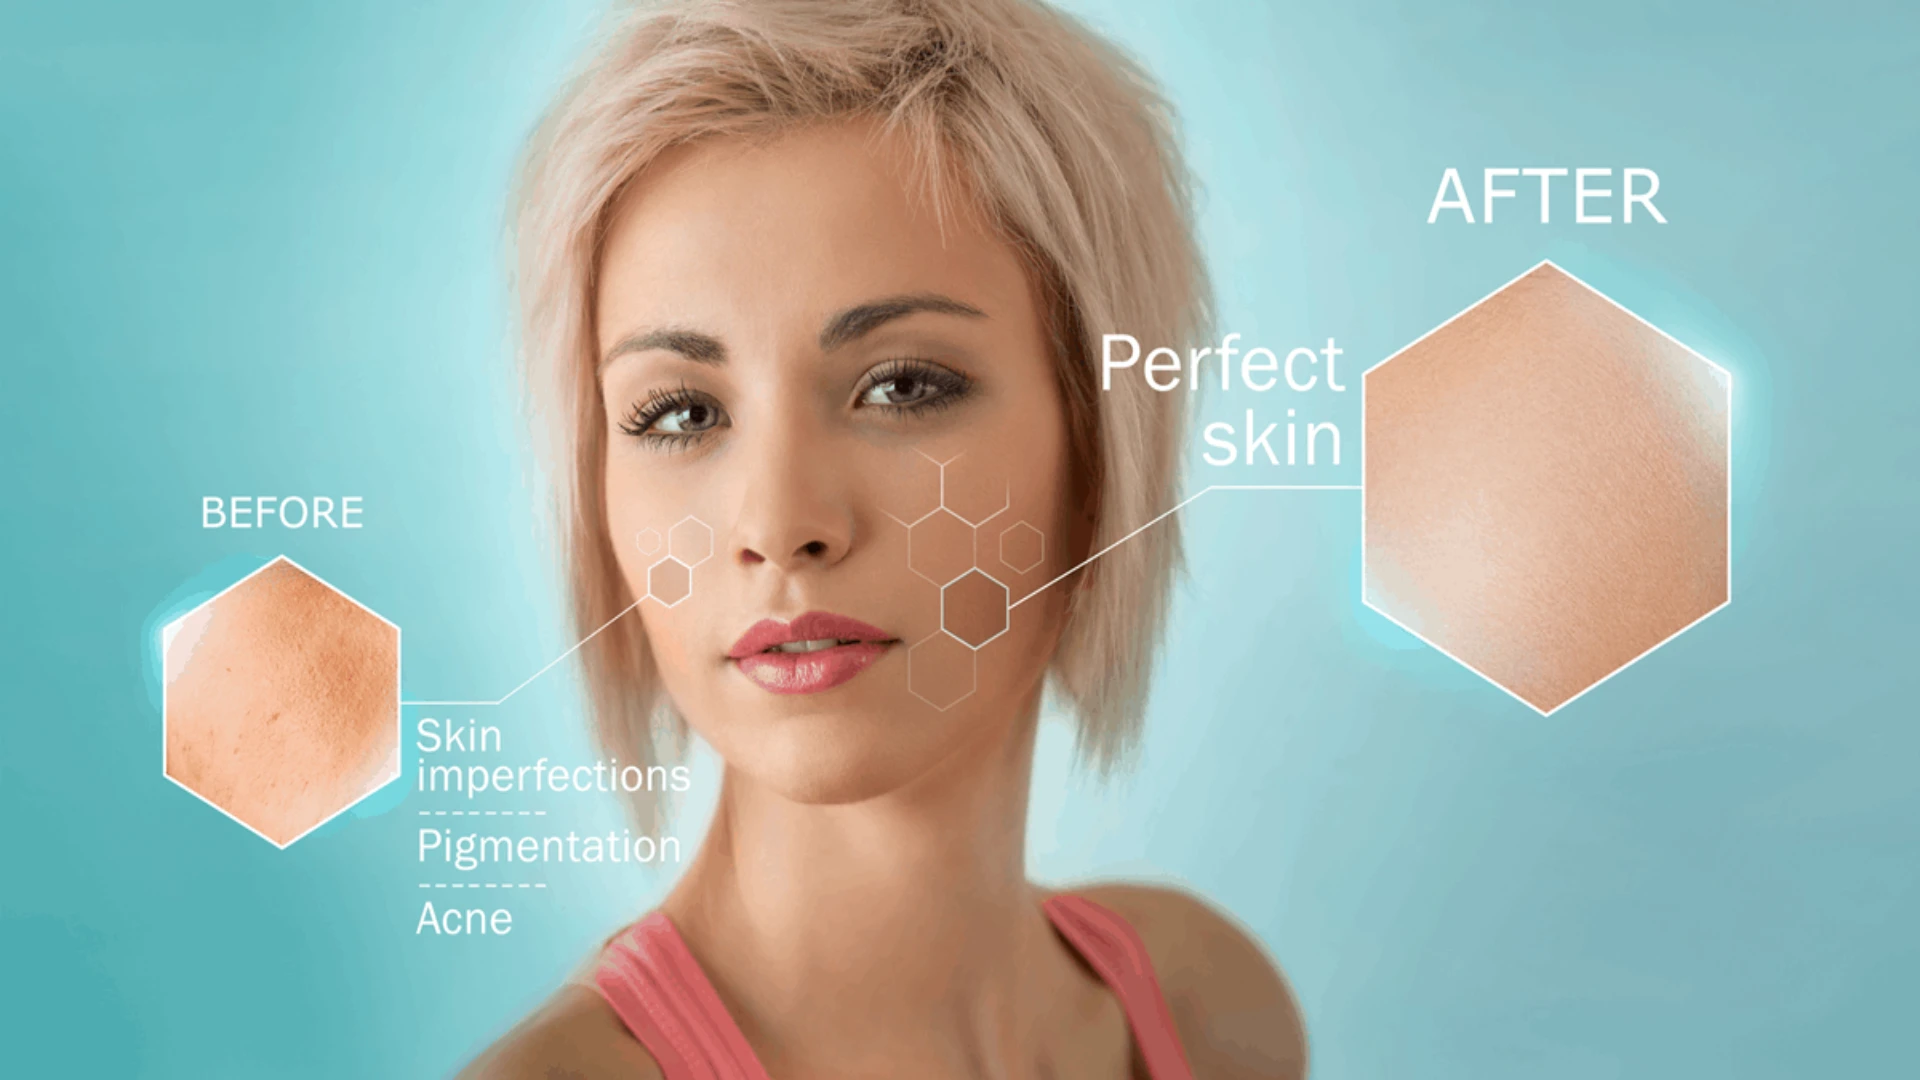 Revive your youthful radiance with the powerful 10 benefits of laser skin rejuvenation.